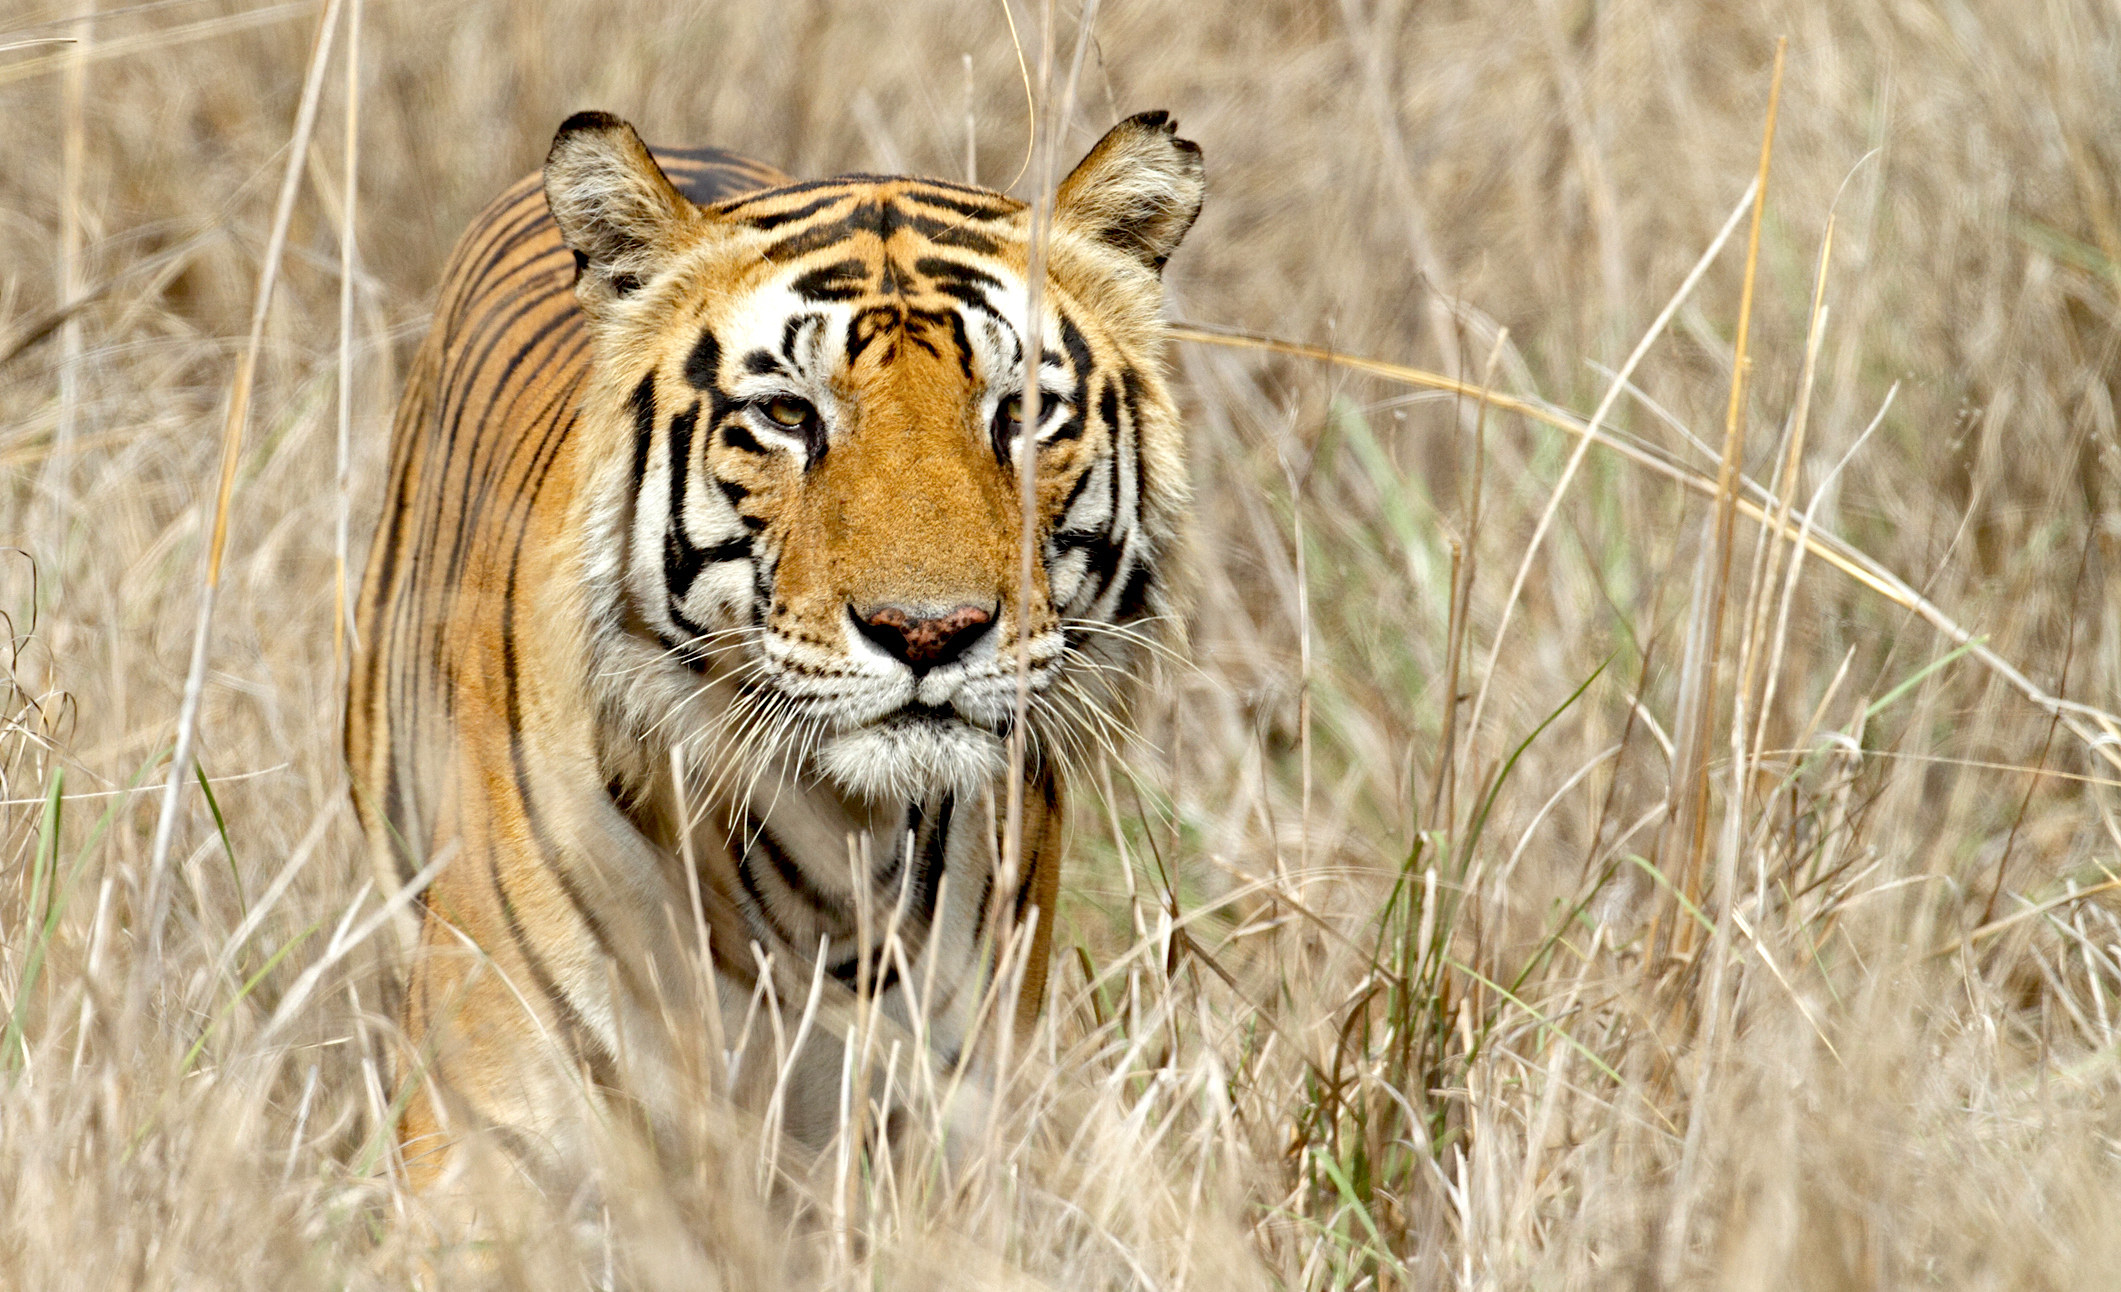 A tiger crouching in tall grass.